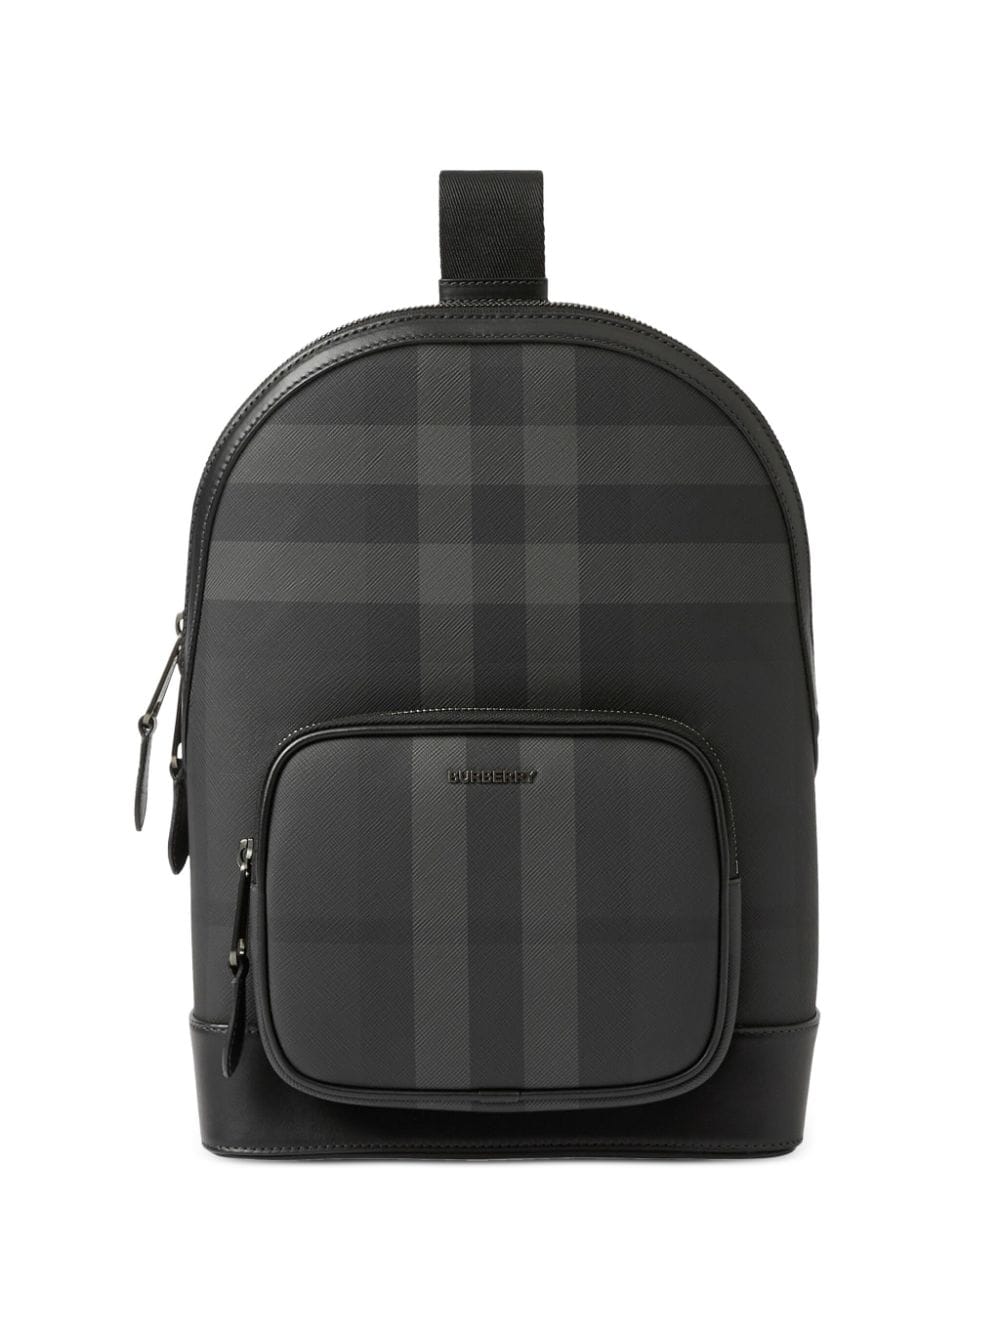 Burberry Messenger Bag Black Used Classic Check Print with a Modern Twist